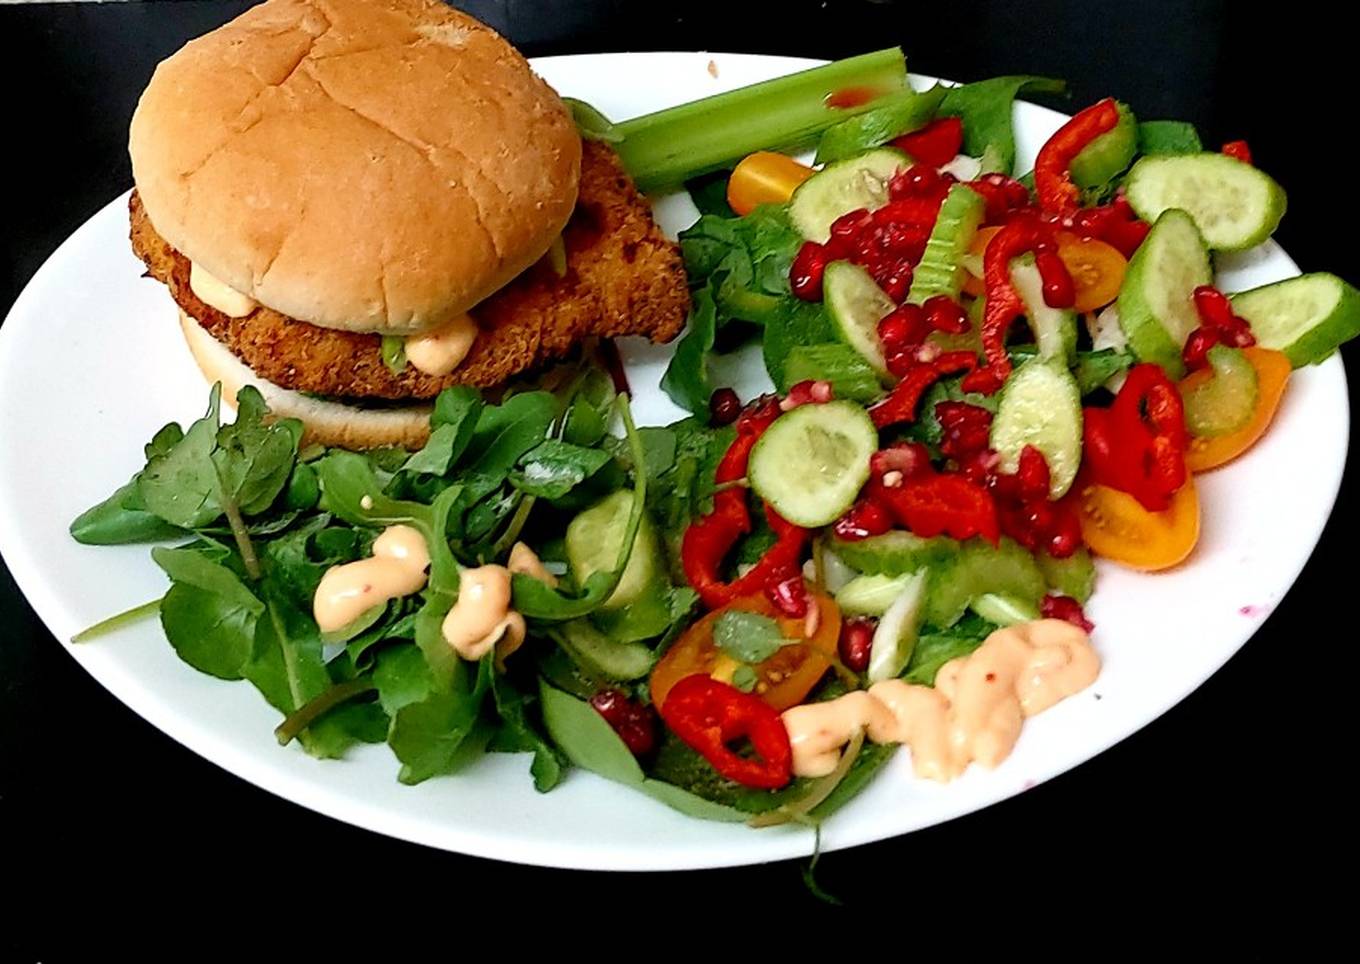 my southern fried chicken burger with a tasty salad